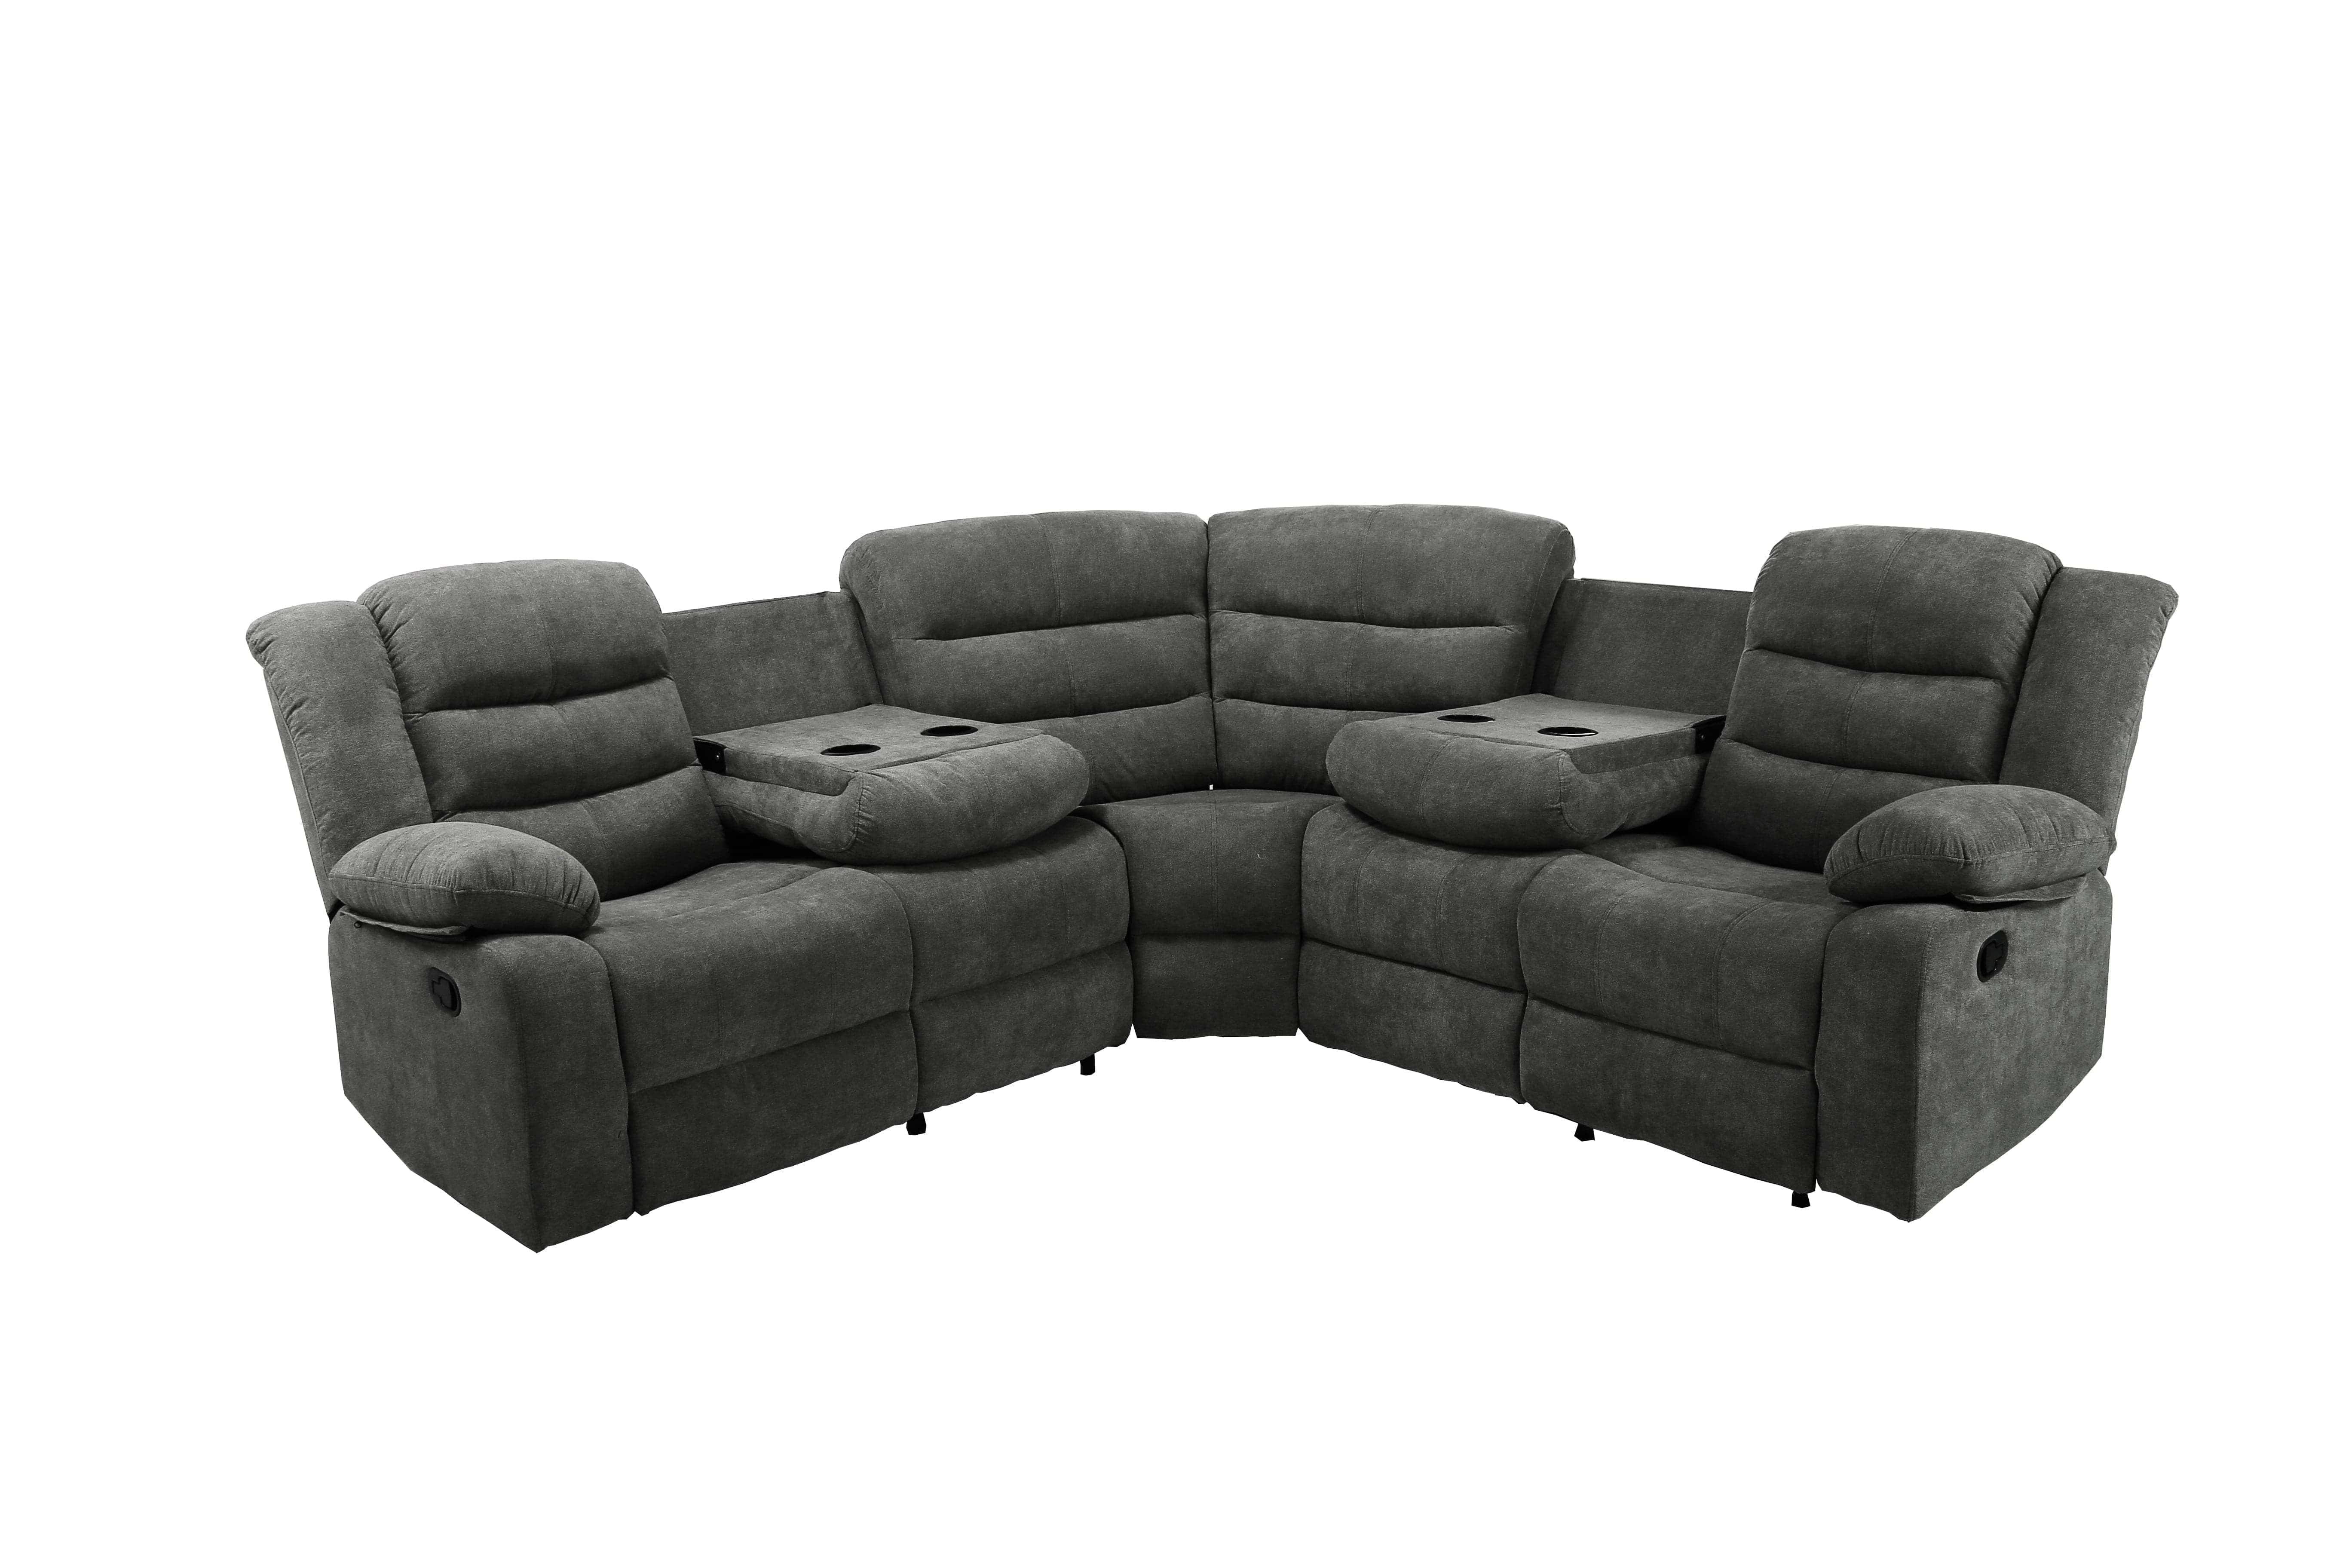 - TFC&H Co. Sectional Manual Recliner Living Room Set - Dark Grey- Ships from The US - sectional at TFC&H Co.